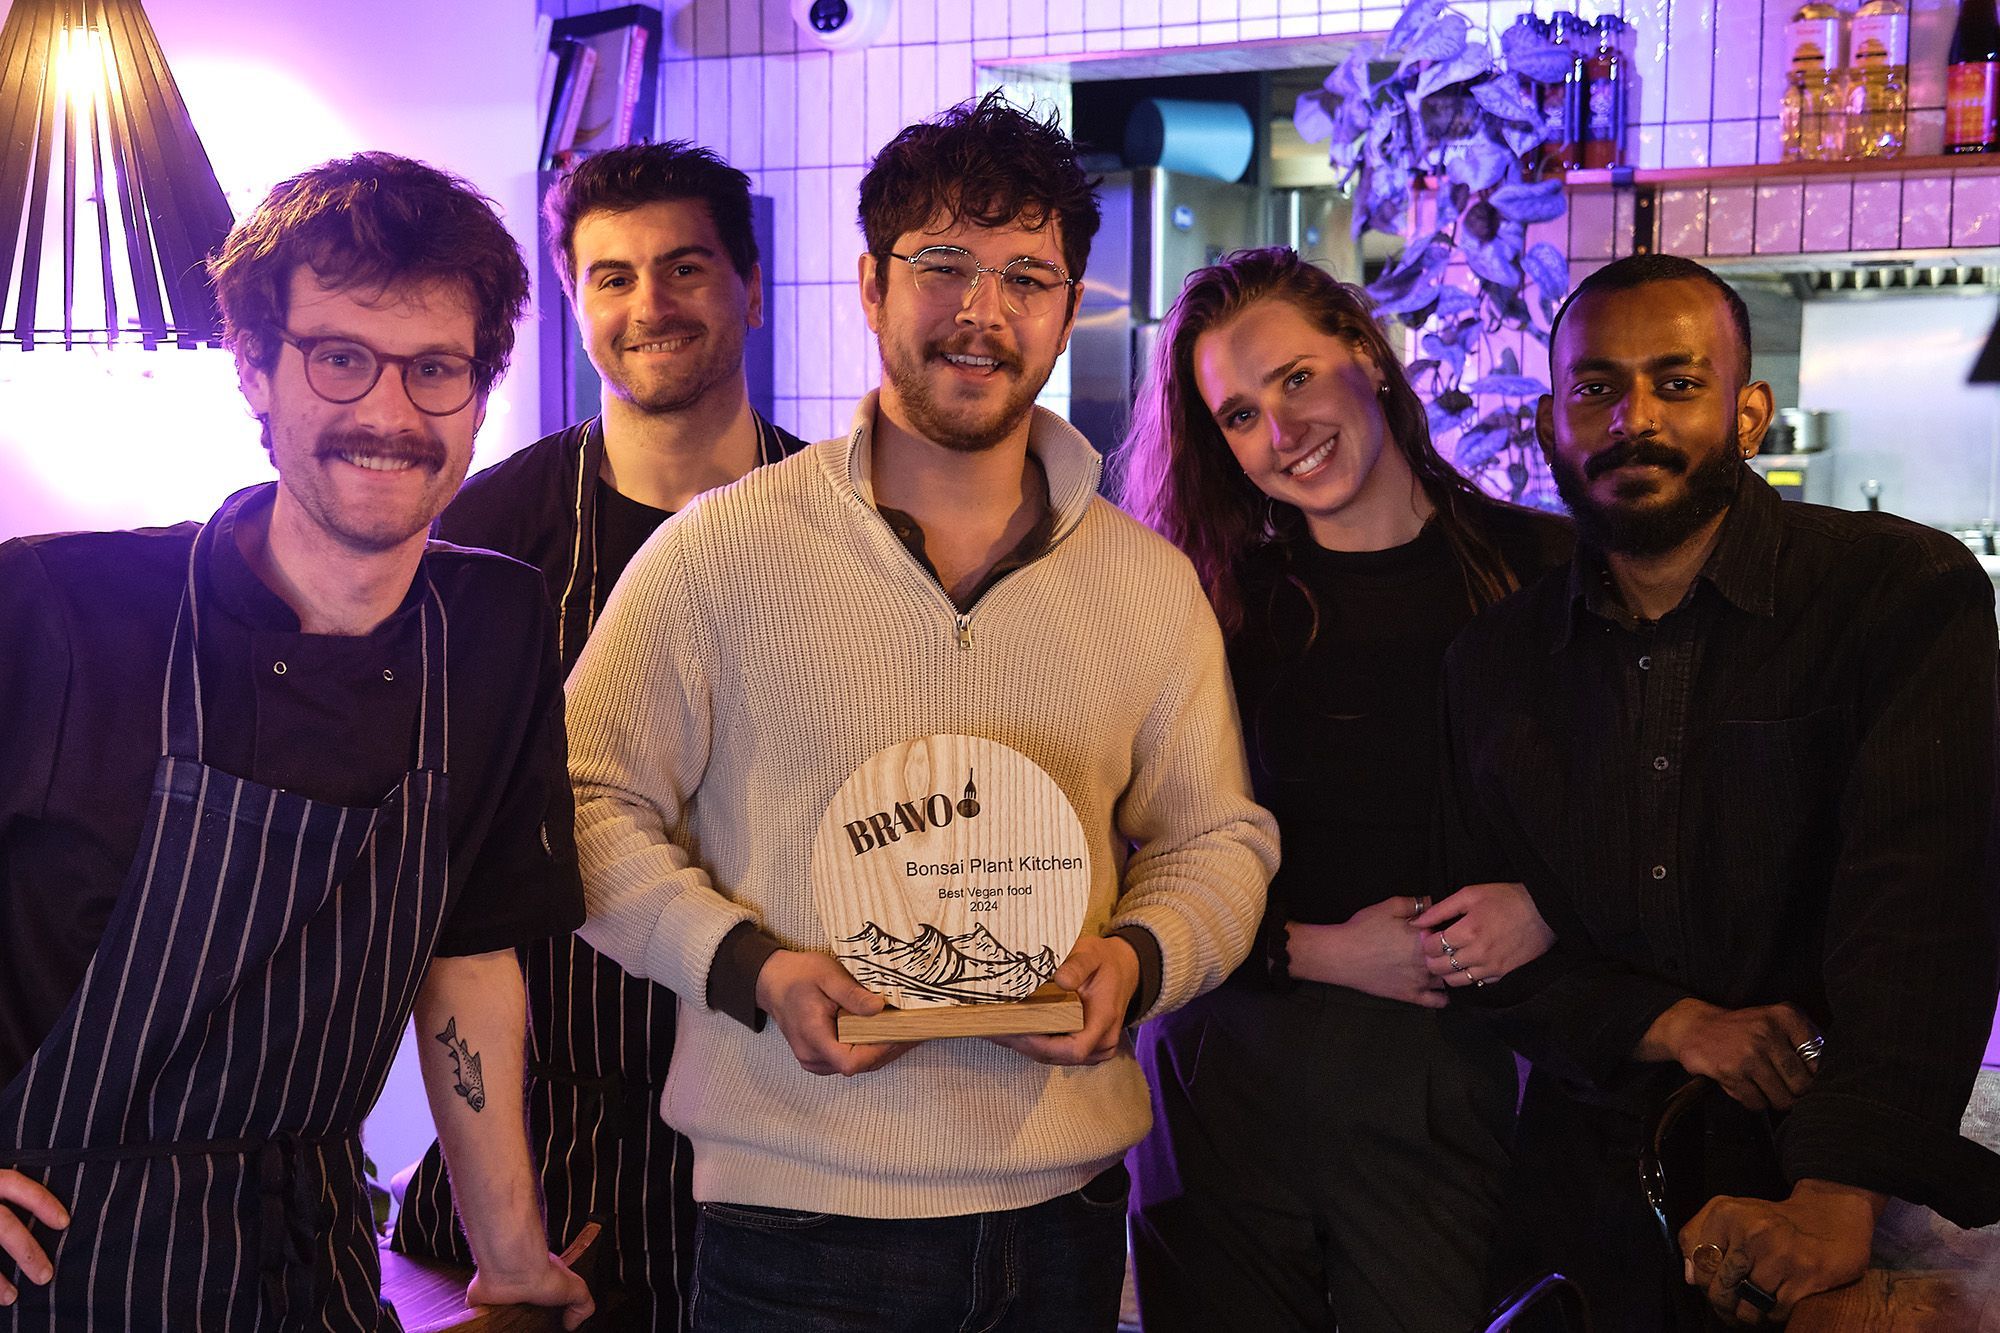 Best Vegan Food Brighton 2024 BRAVO Bonsai. Pictured, Bonsai Plant Kitchen who are located on Baker Street off London Road. Dominic Sherriff and his team proudly showcasing their 2024 BRAVO Award.